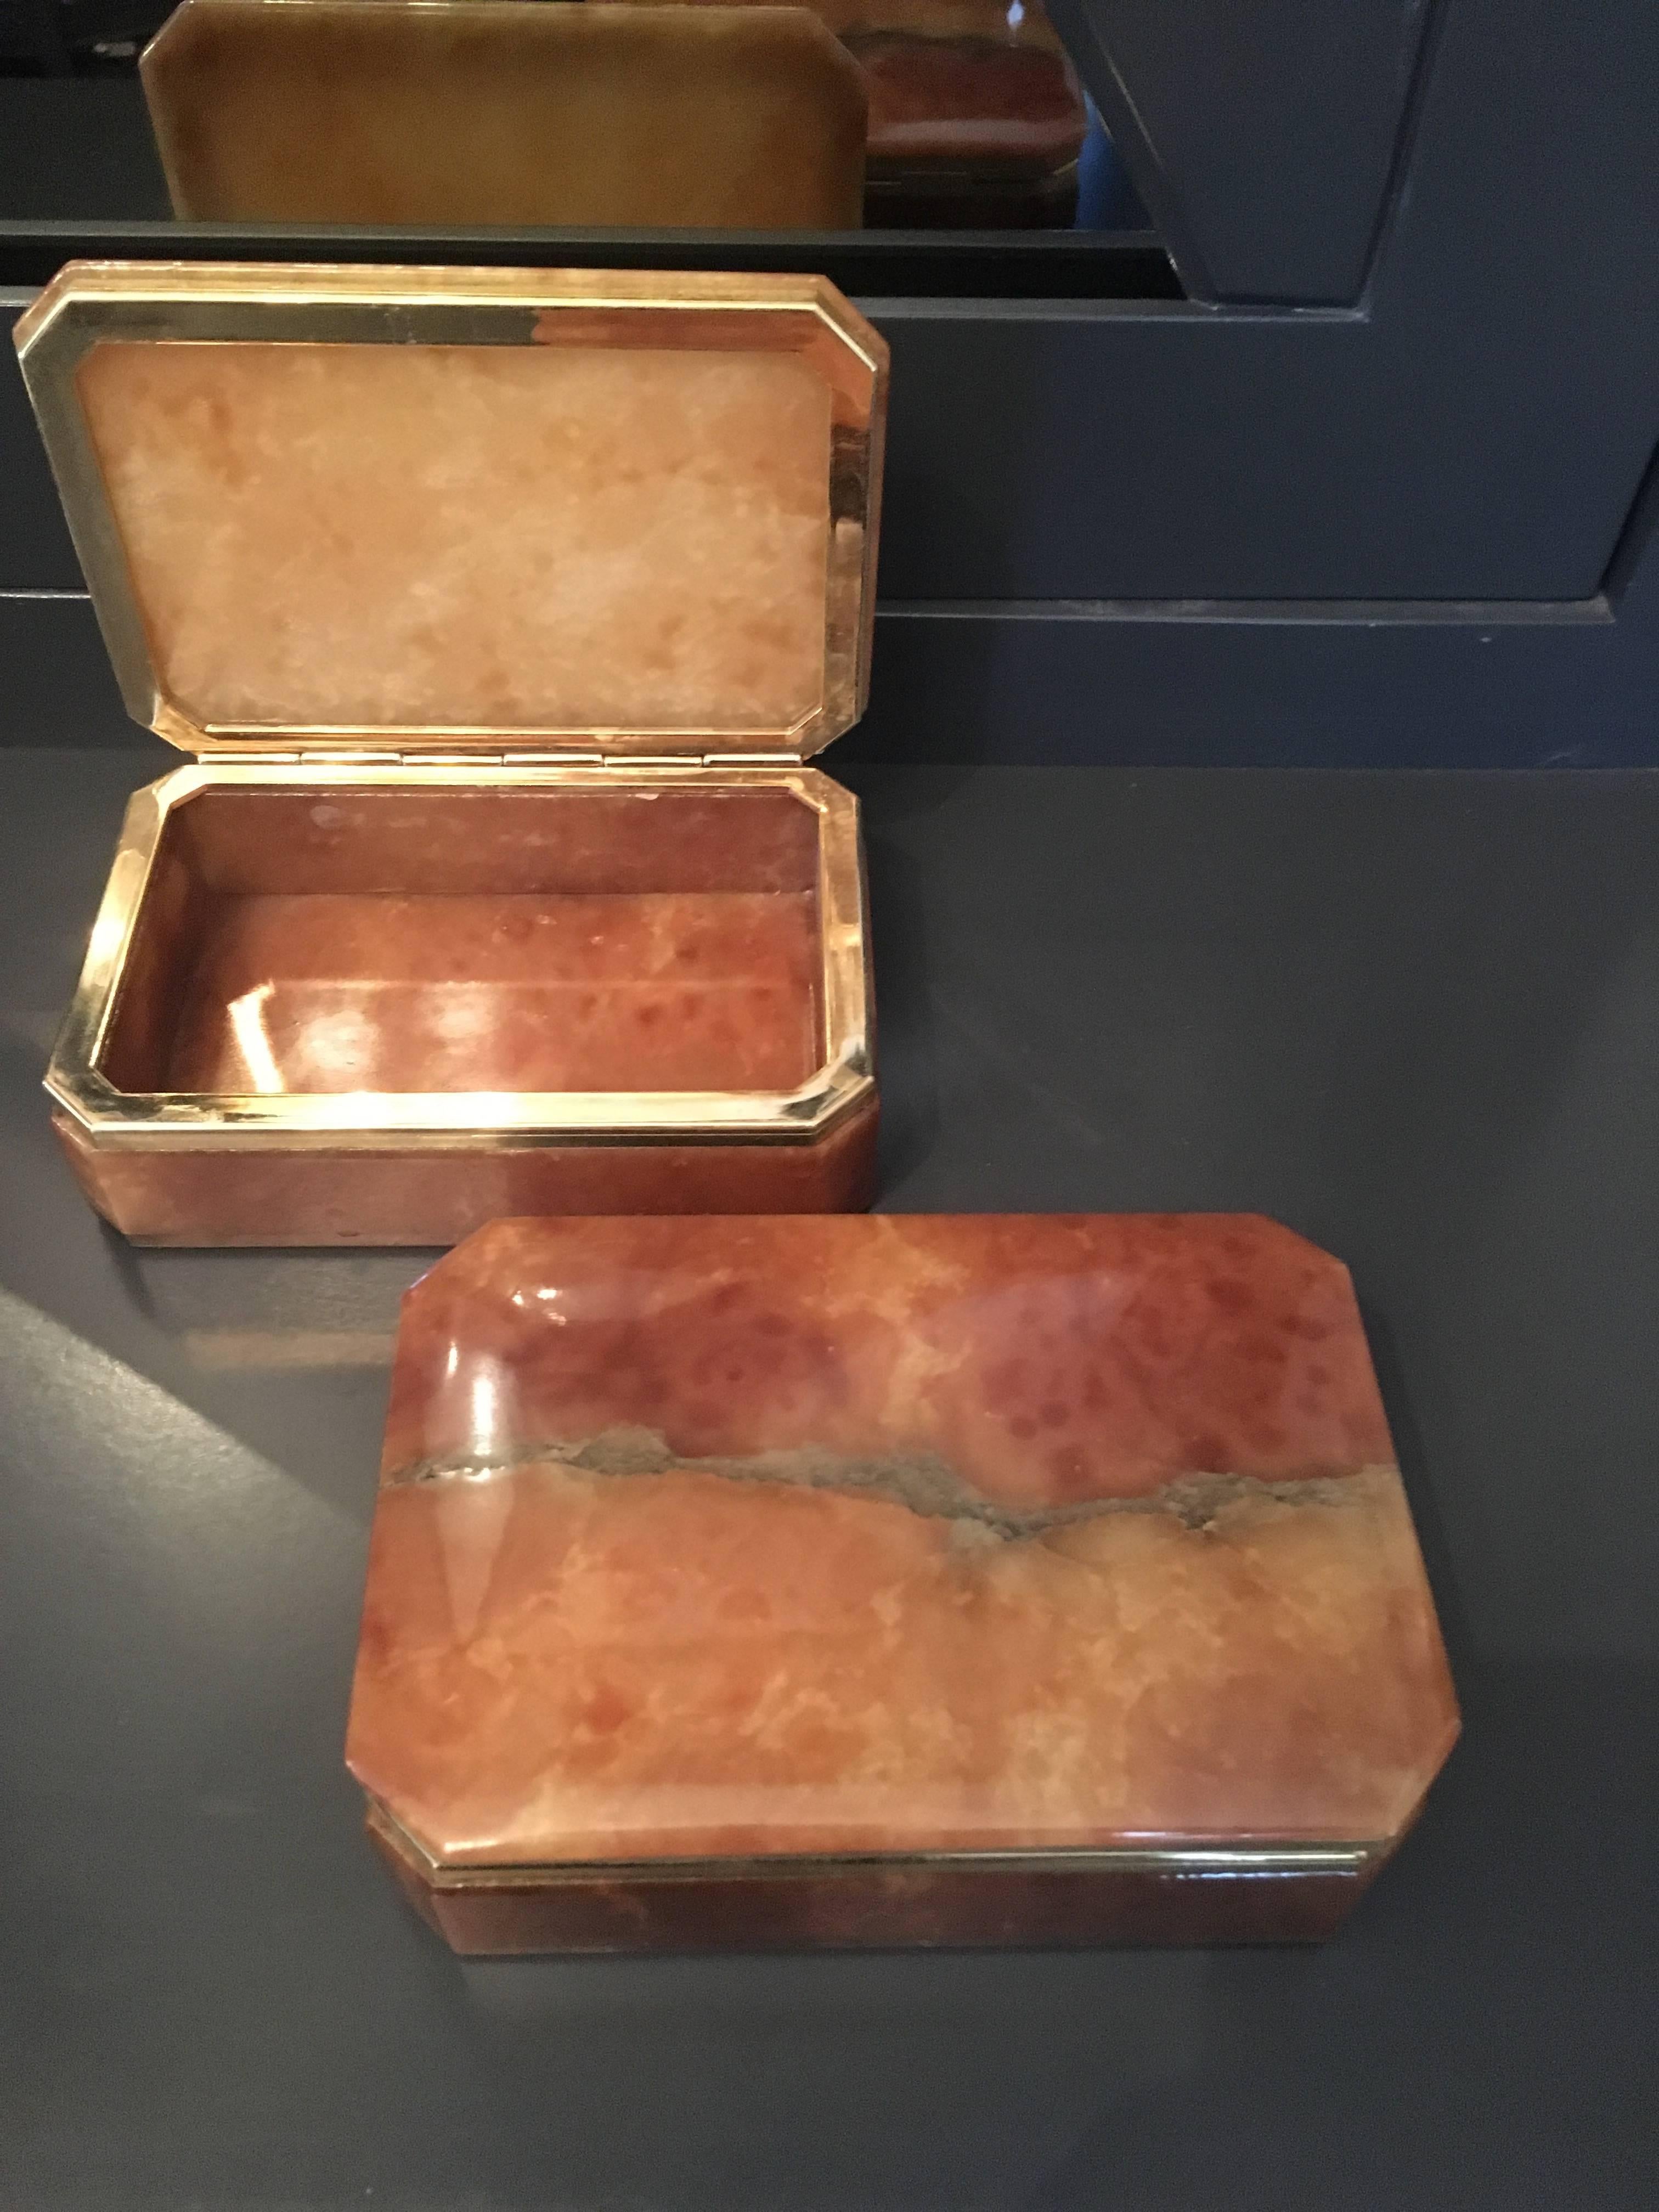 Pair of Italian alabaster boxes with brass trim - handsome on the dressing table or desk - see also our more feminine color boxes.

Darren Ransdell Design.